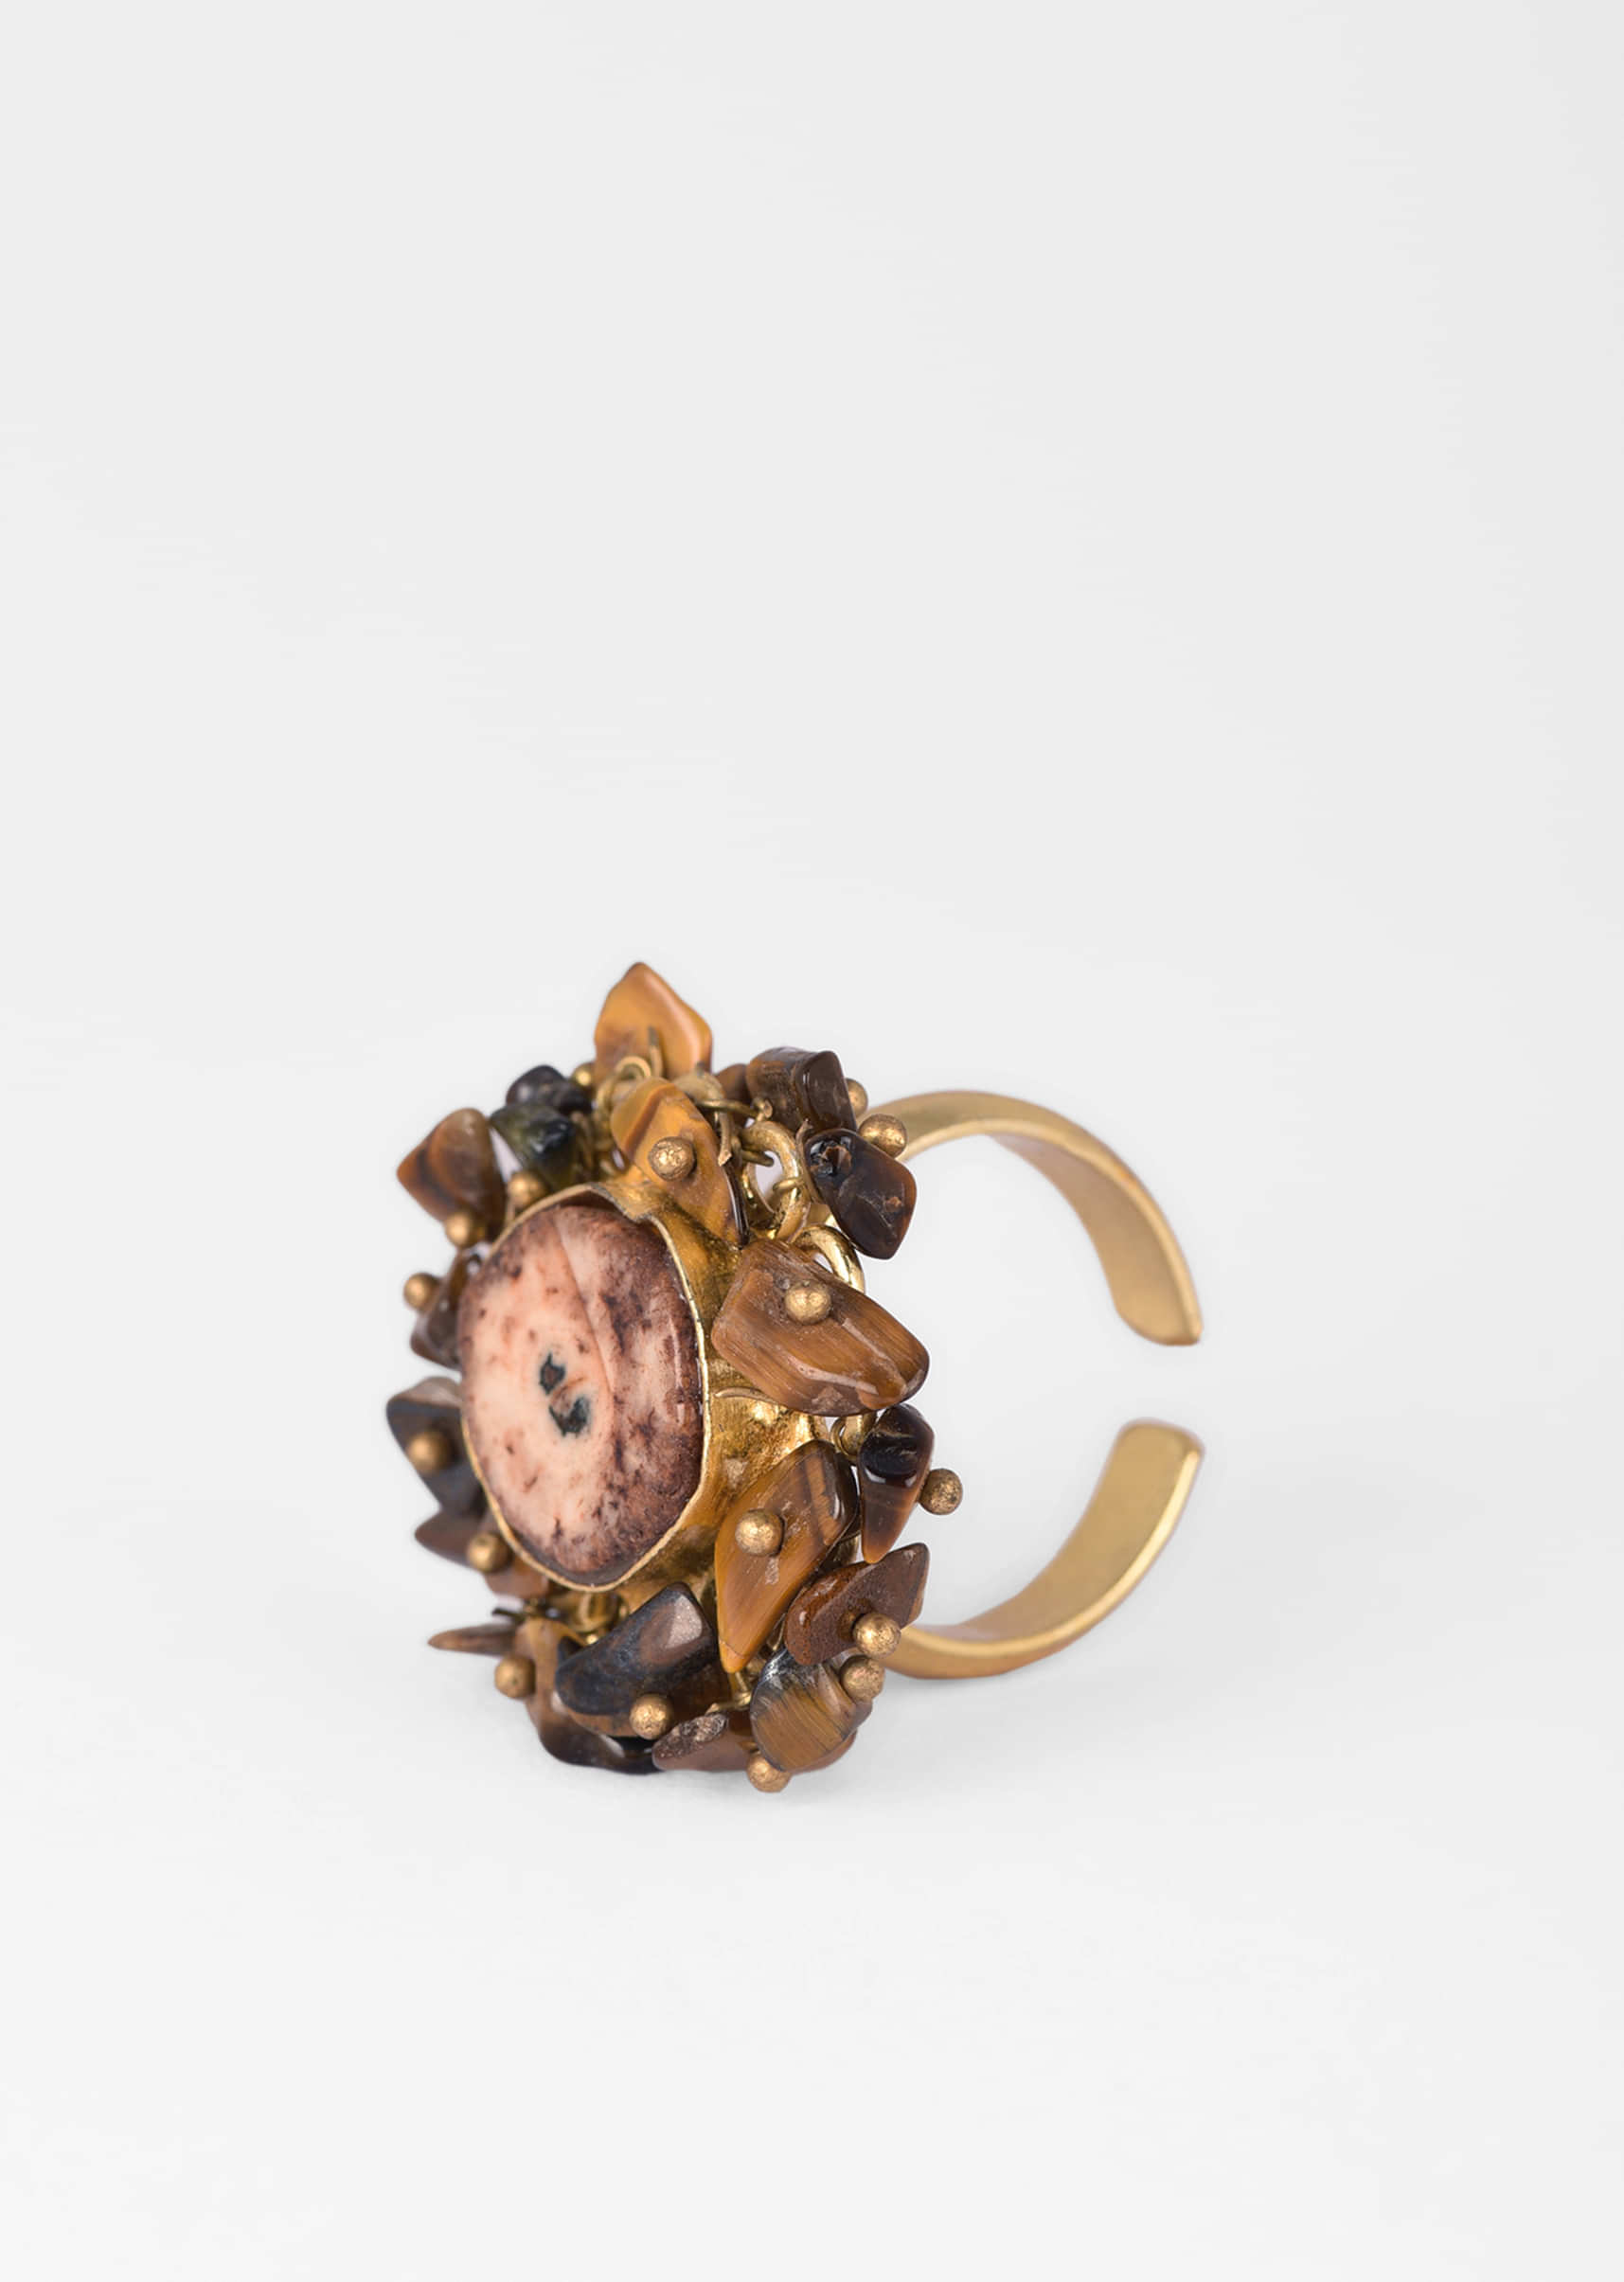 Gold Plated Ring With A Brown Semi Precious Stone Centre And Tiny Stone Pieces All Over 